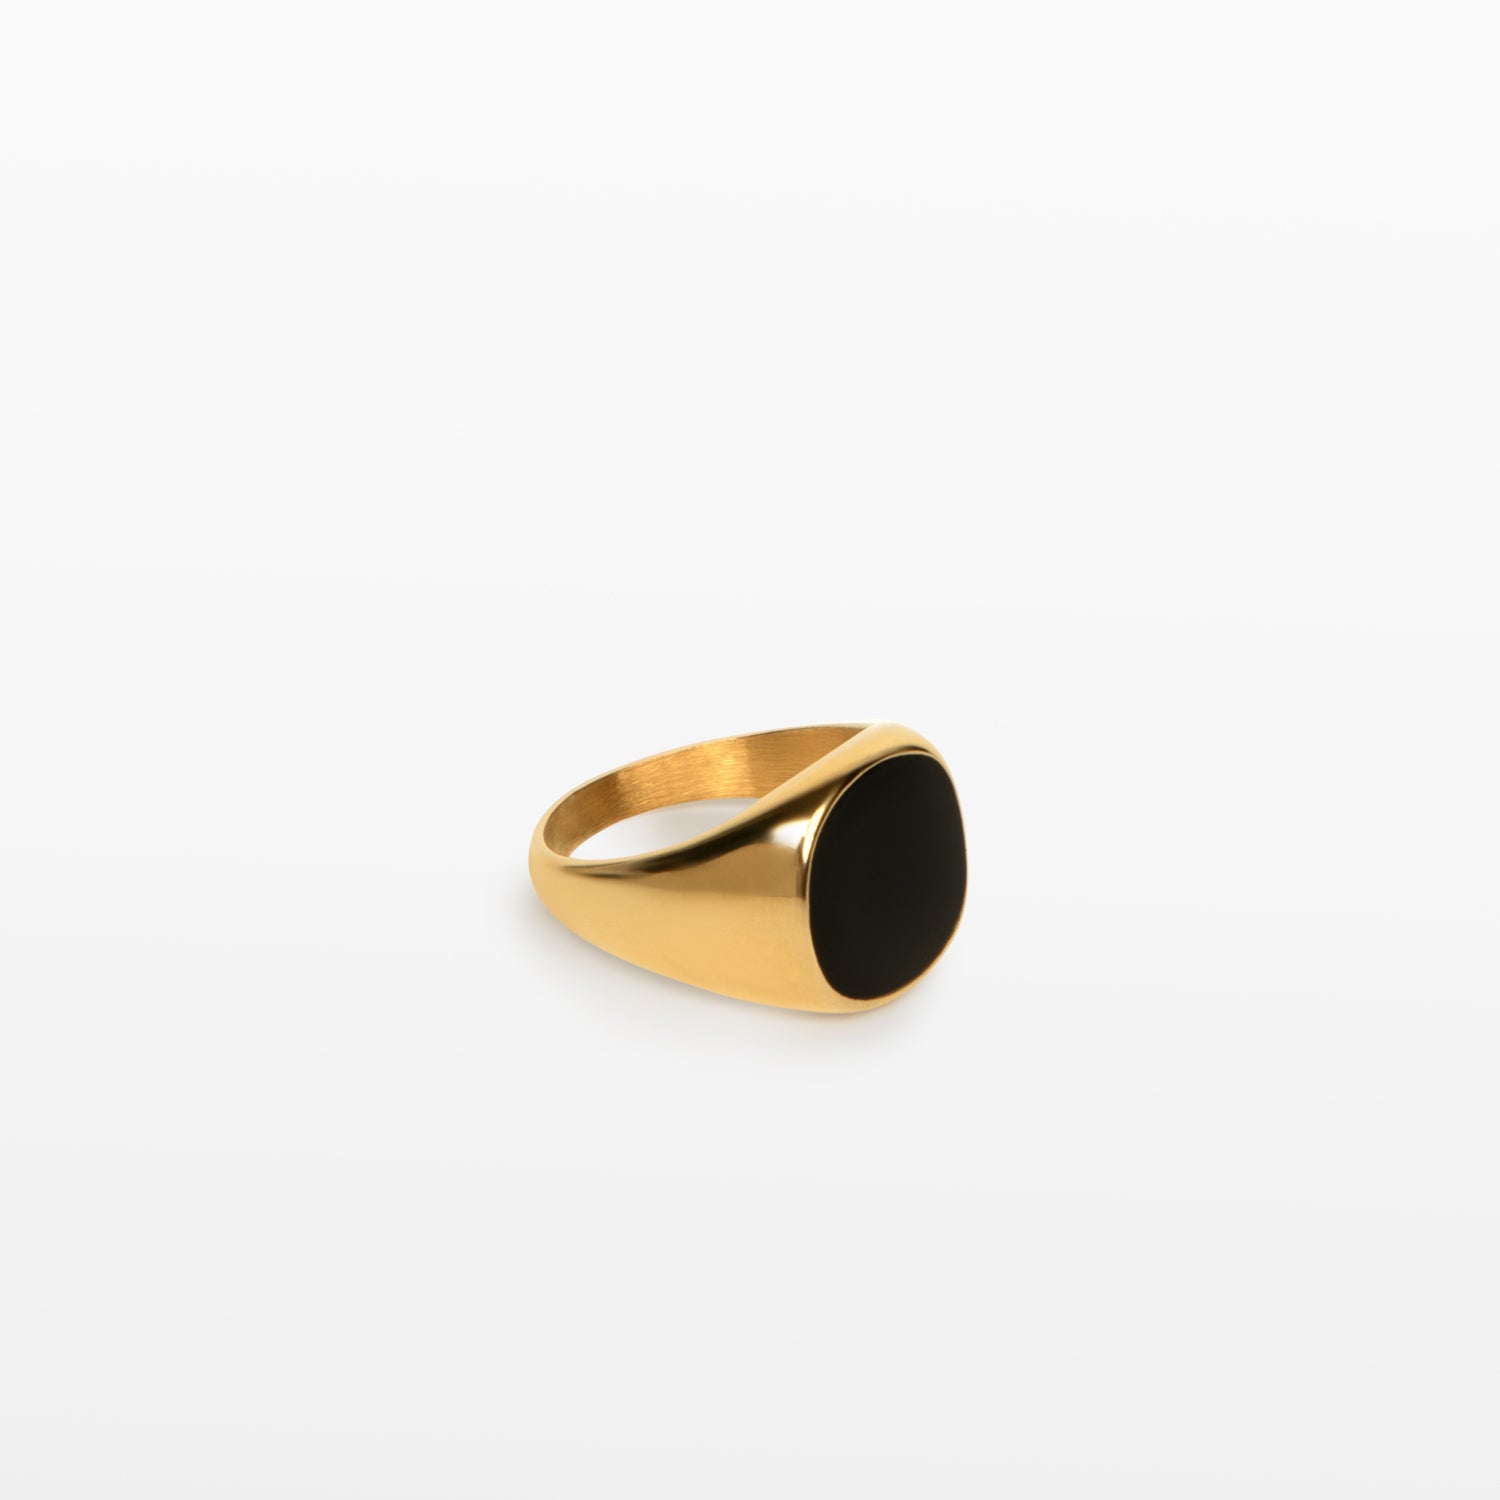 Image of the Black Signet Ring is crafted with 18K Gold Plating, which is resistant to tarnishing and water damage.